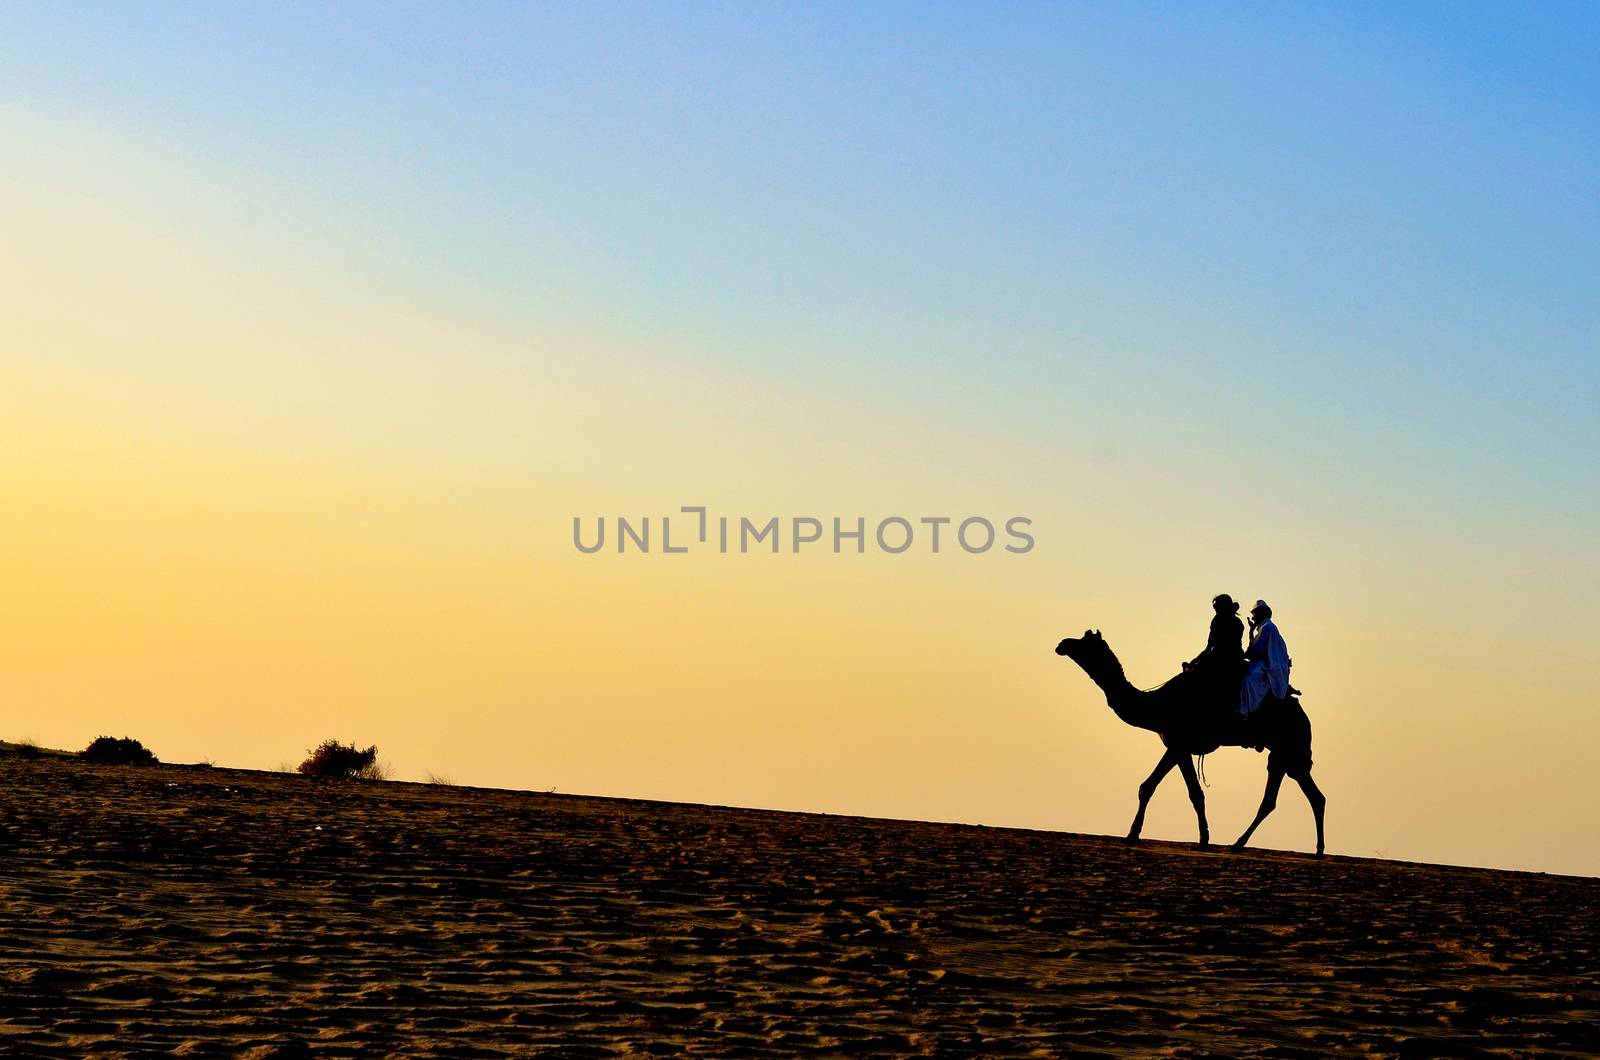 Silhouette of an Arabian camel carrying tourists in Sam Sand Dunes, Thar Desert, Jaisalmer, India. These sand dunes are amongst the most famous ones in Rajasthan. by jayantbahel